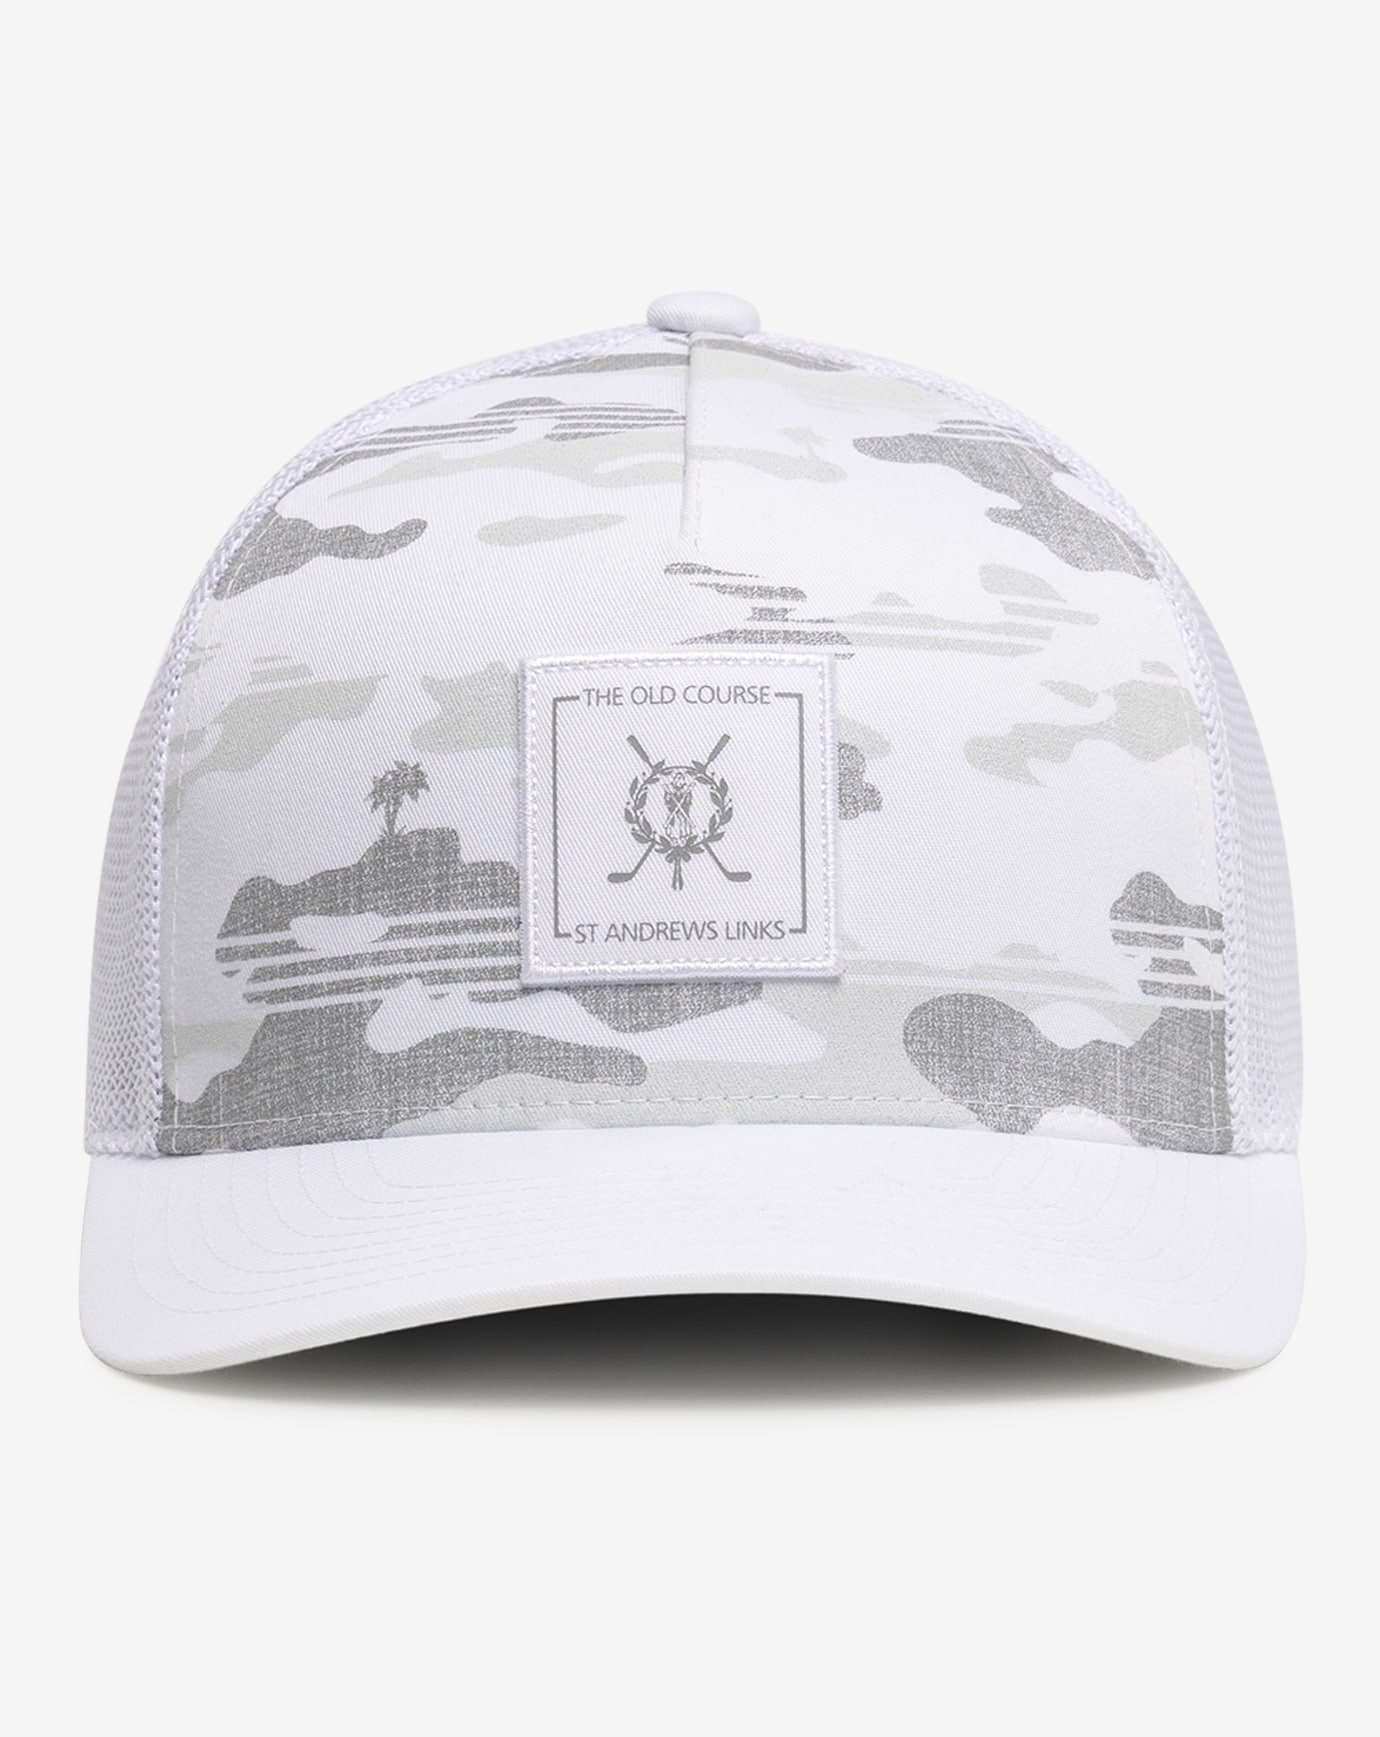 ST ANDREWS EXPEDITION SNAPBACK HAT Image Thumbnail 1